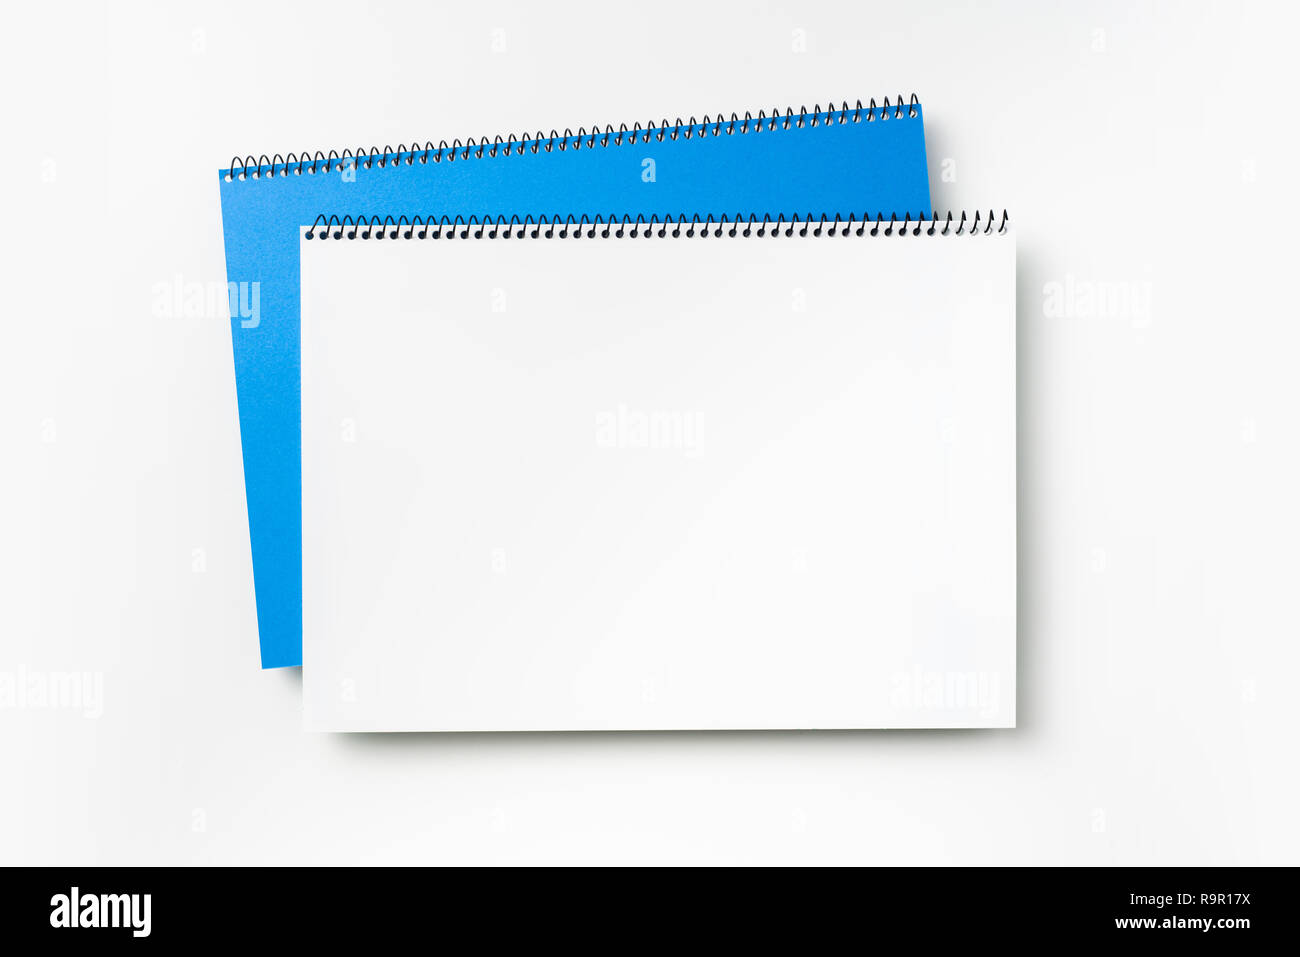 Design concept - Top view of blue spiral notebook and pencil isolated on background for mockup Stock Photo